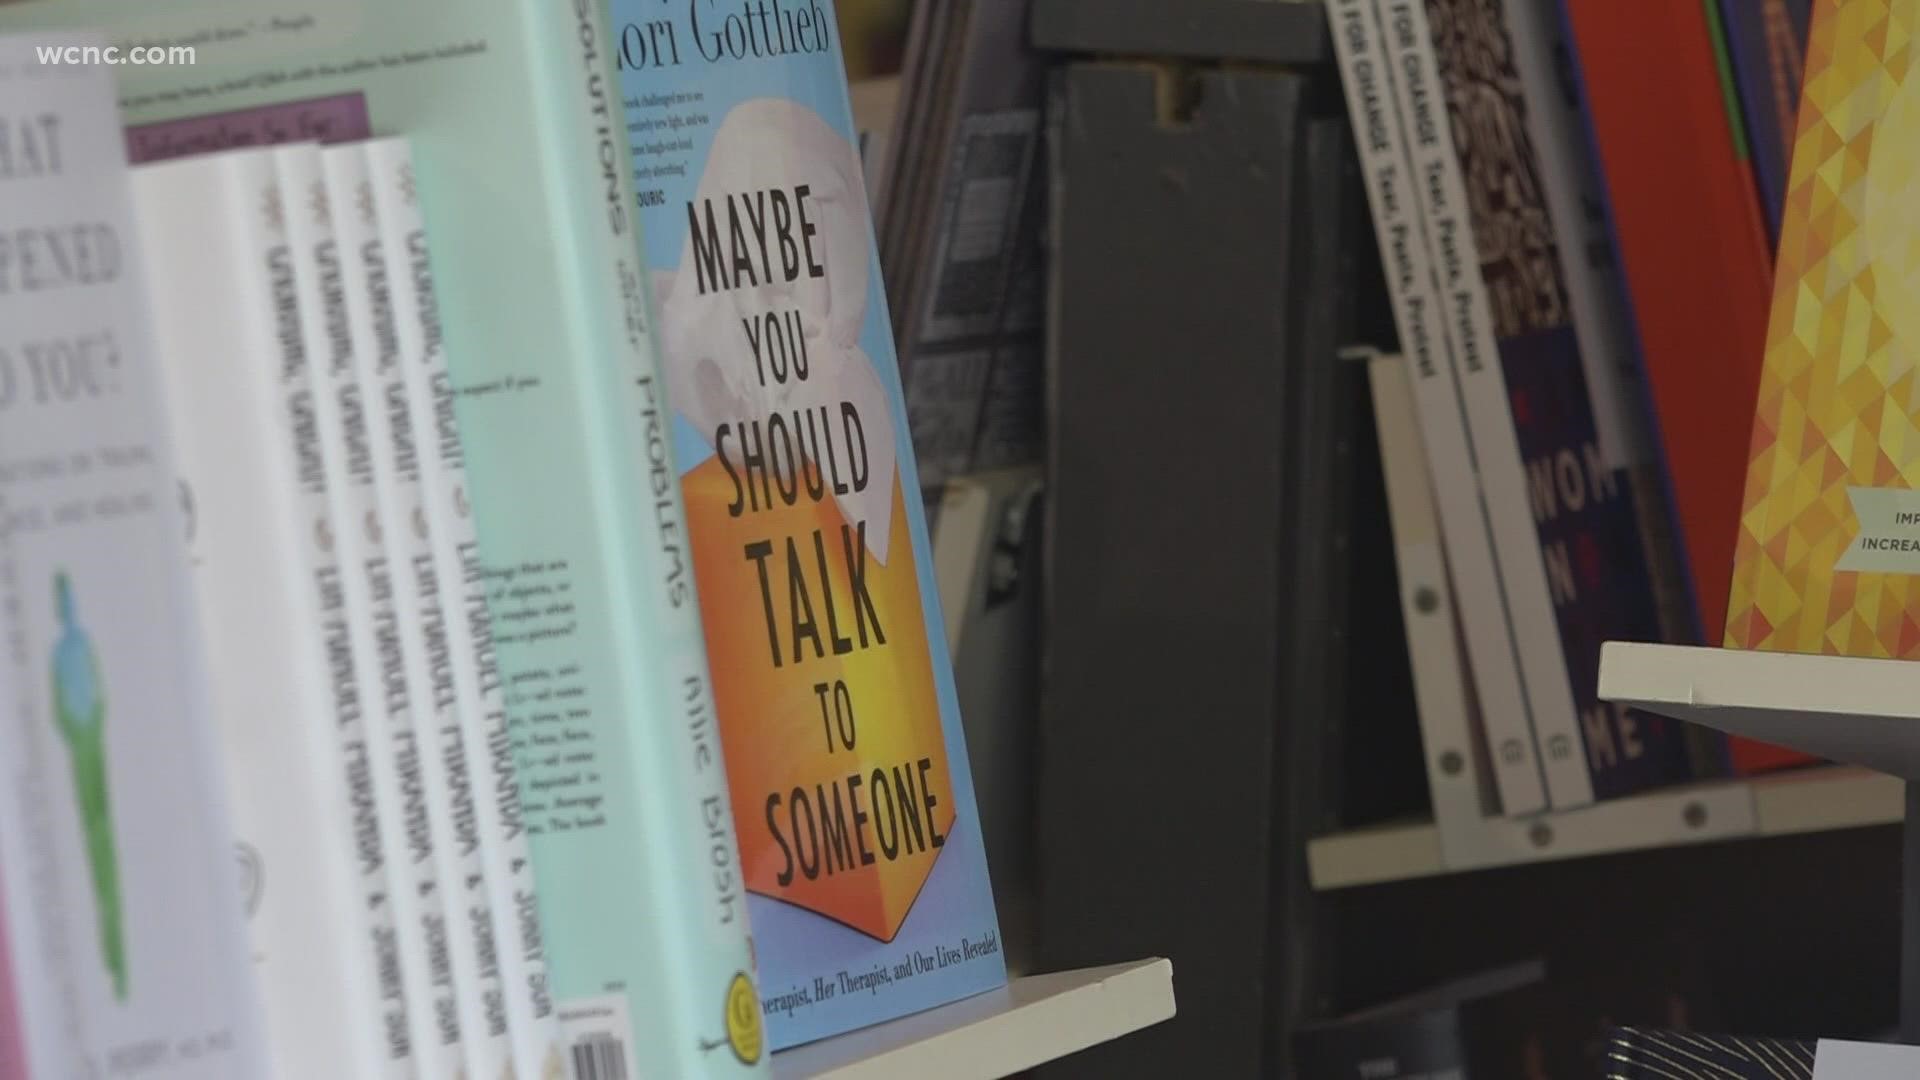 Kendall Morris looks at how local publishers and bookstores are being affected.